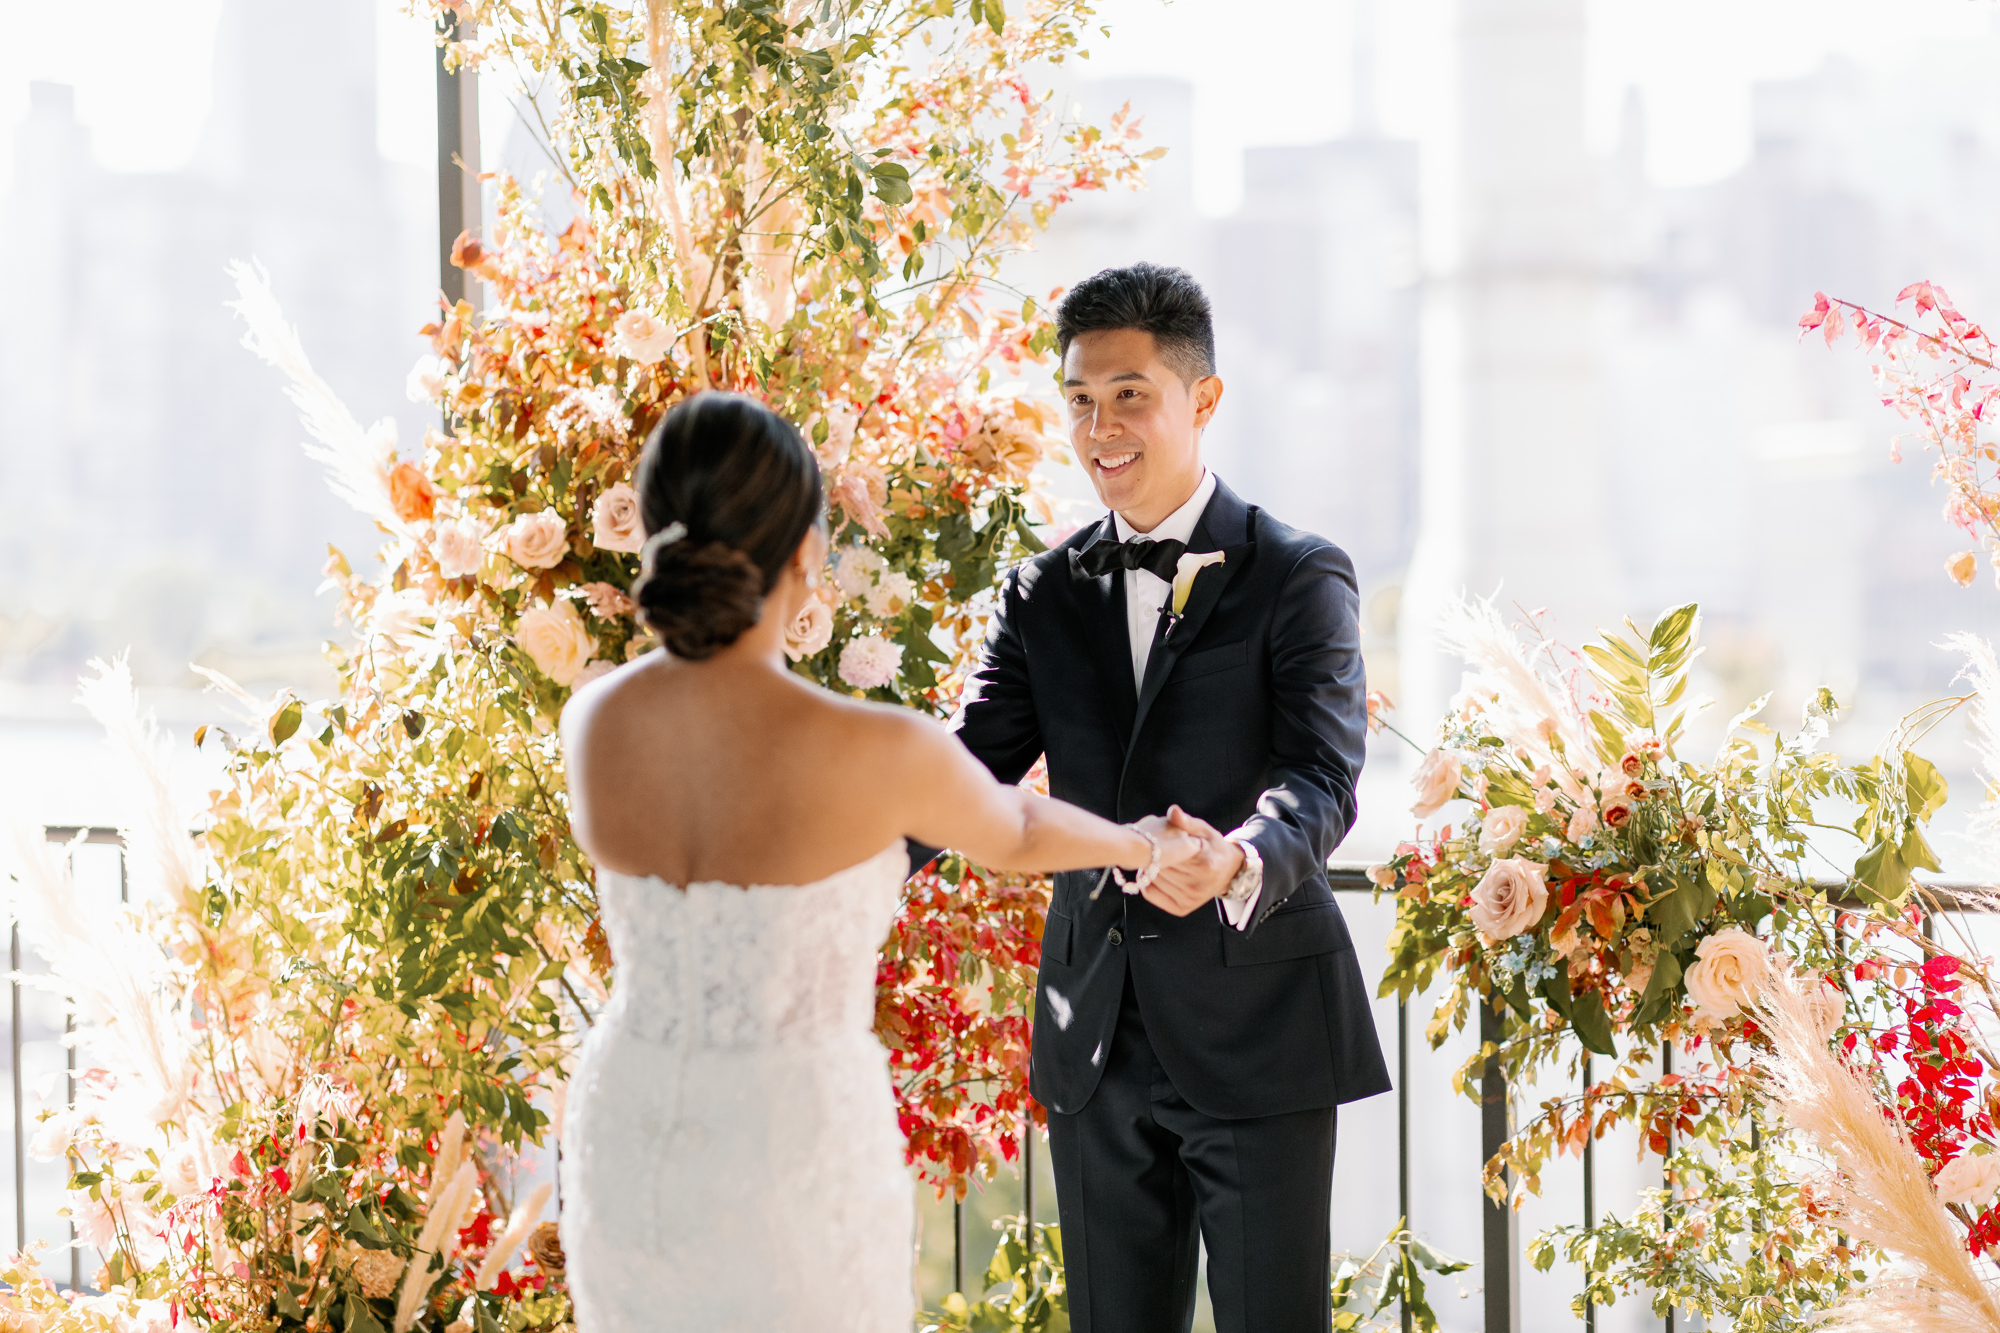 Ravel Hotel wedding in New York with floral arch